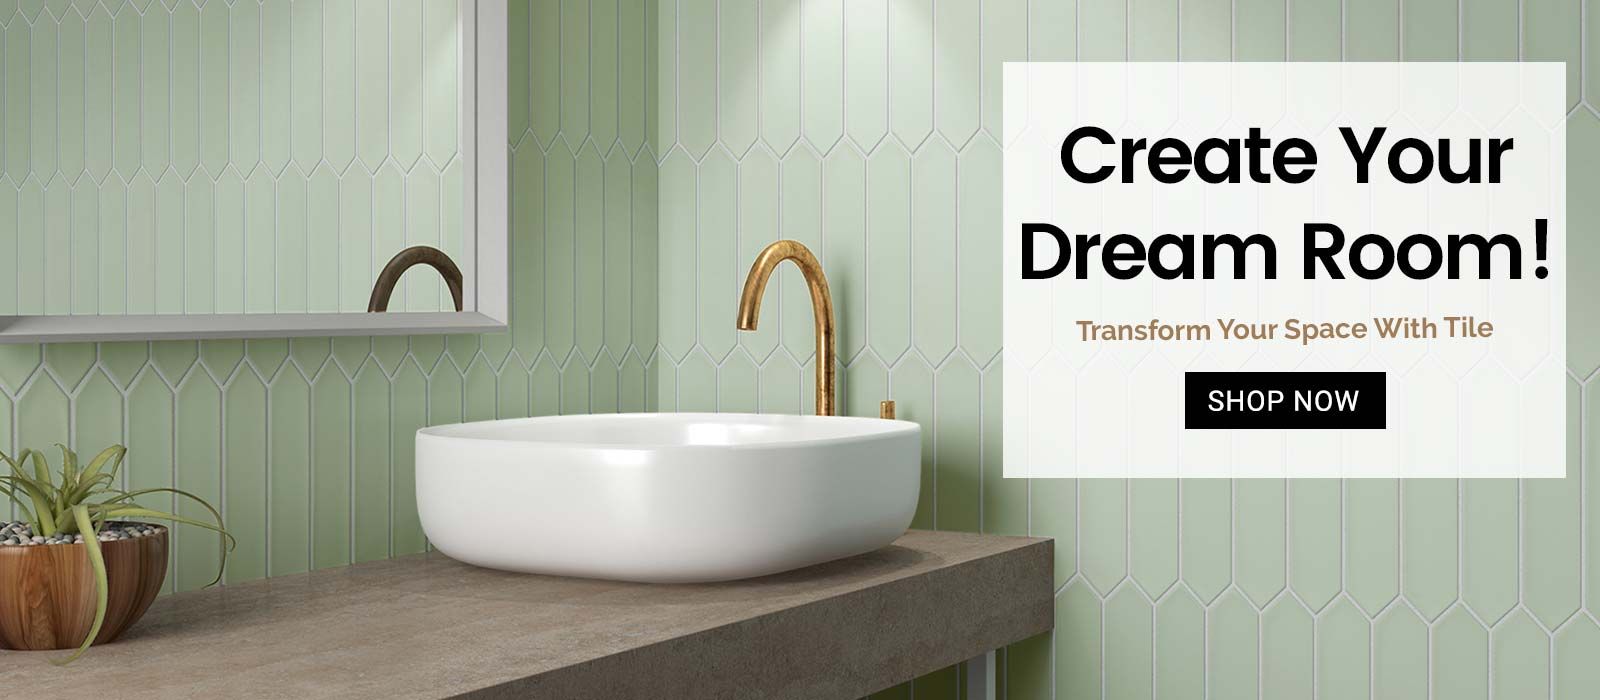 Create Your Dream Room! Transform Your Space With Tile - Shop Now!